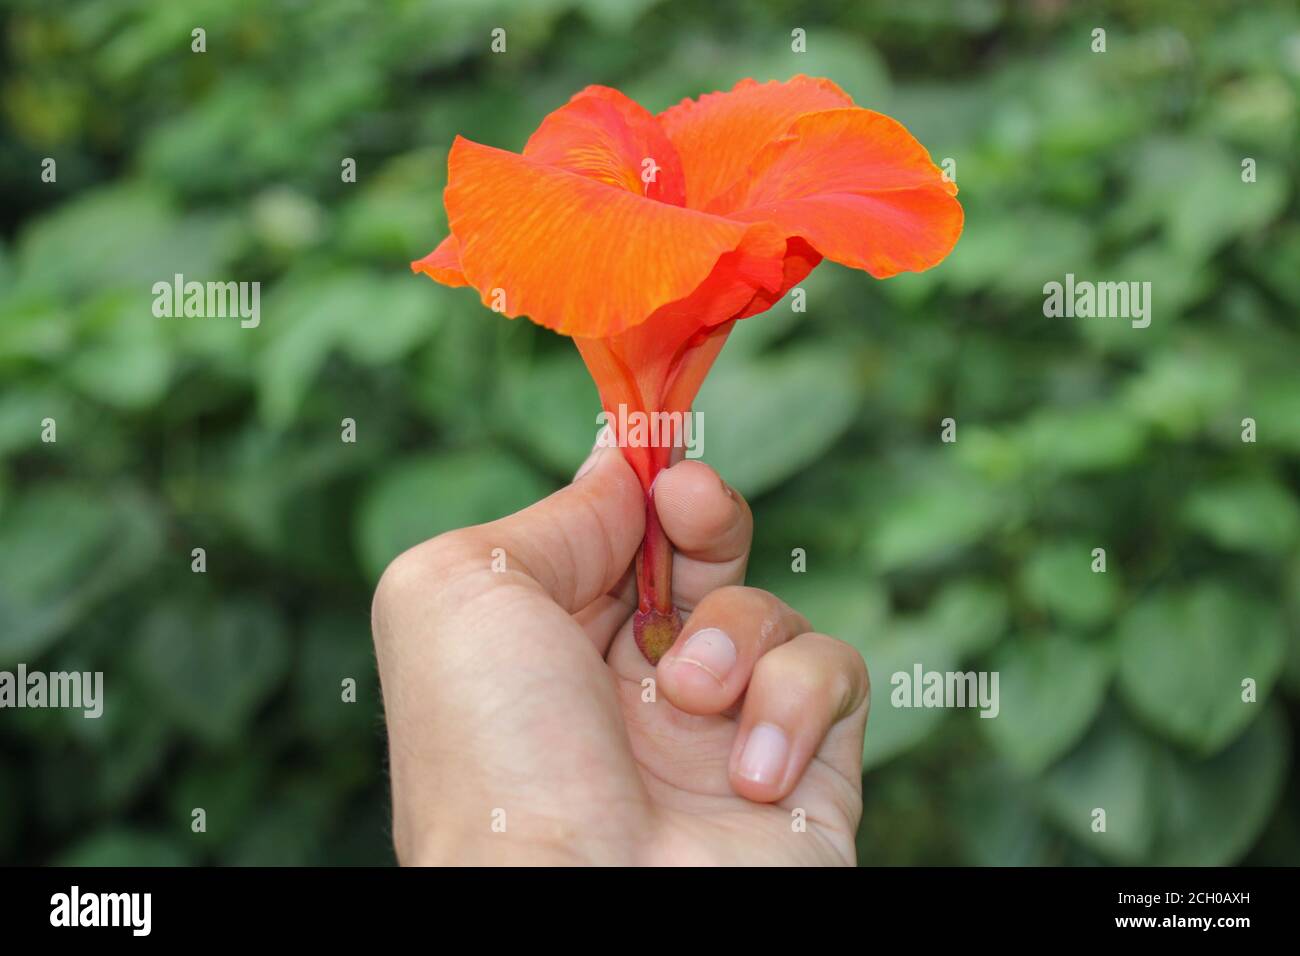 red Canna flowers background asia flower image Stock Photo